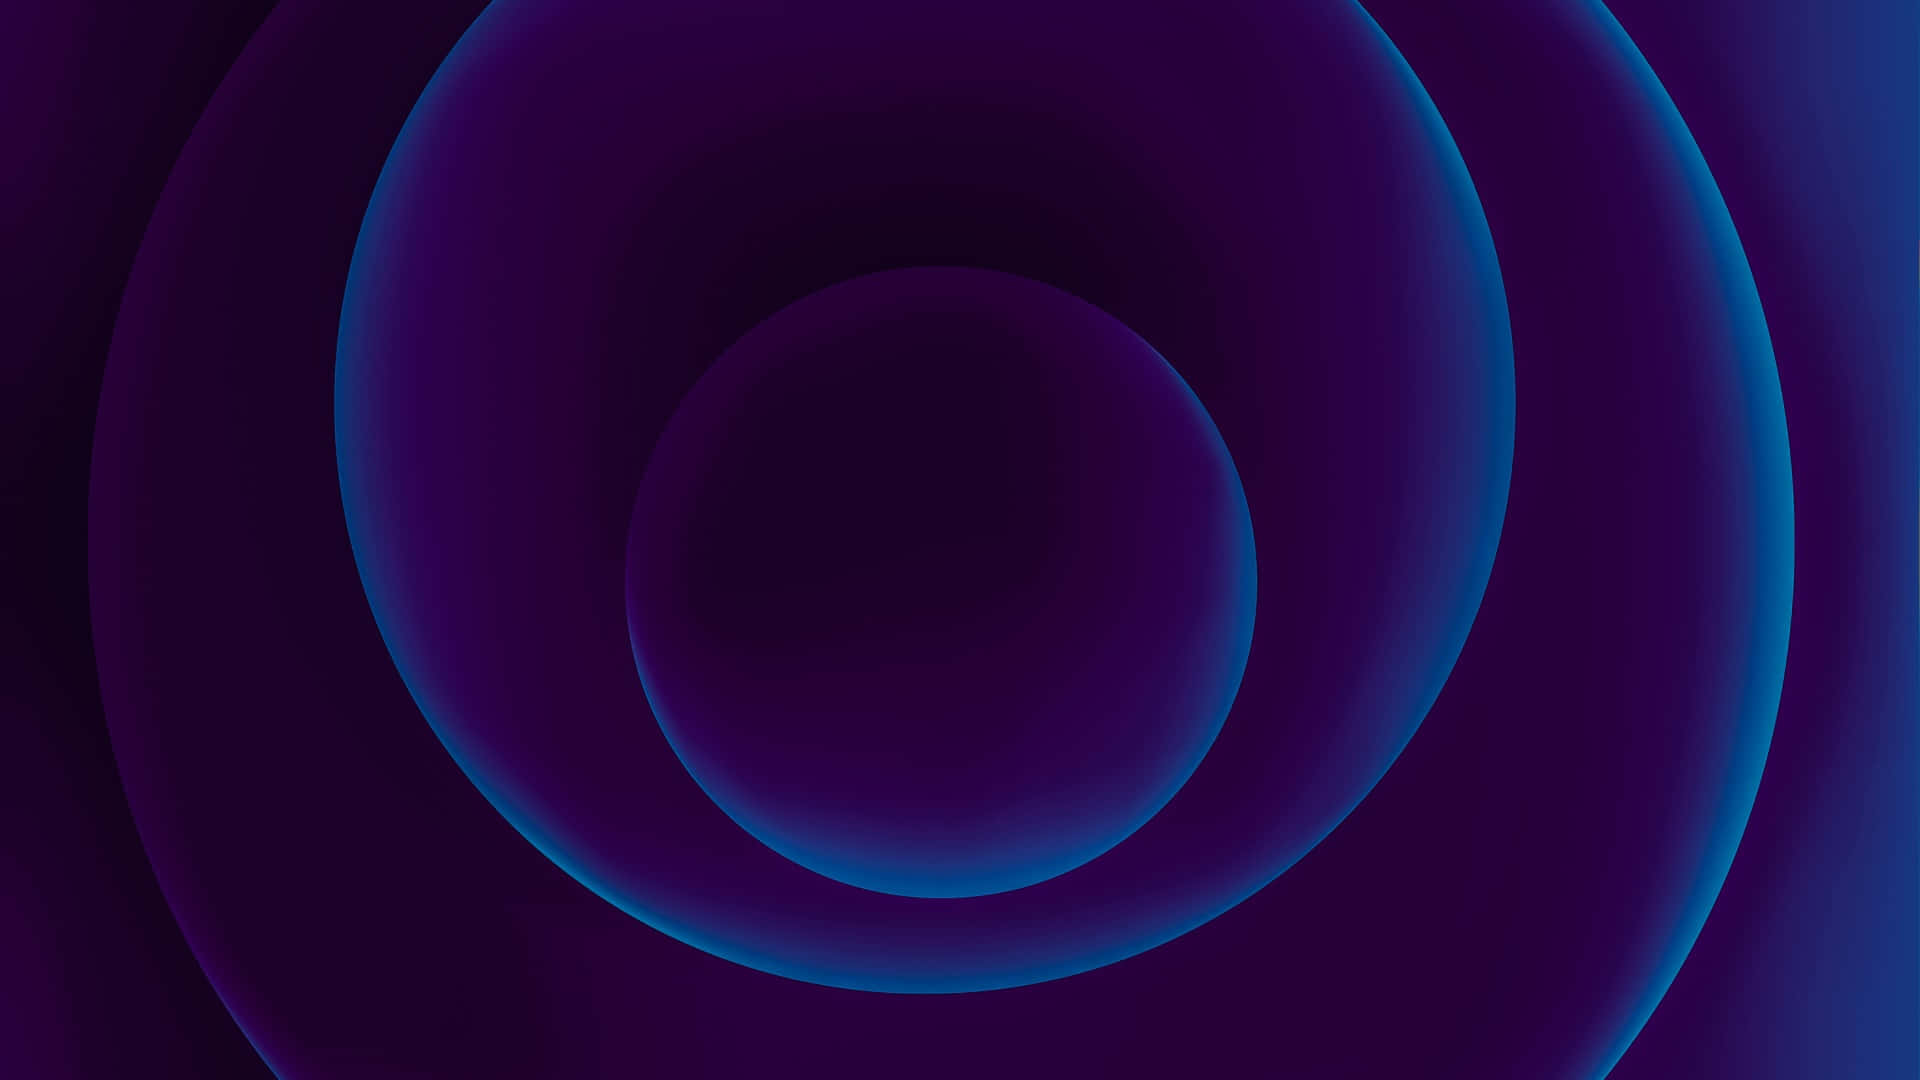 Abstract Blue Concentric Circles Background Wallpaper